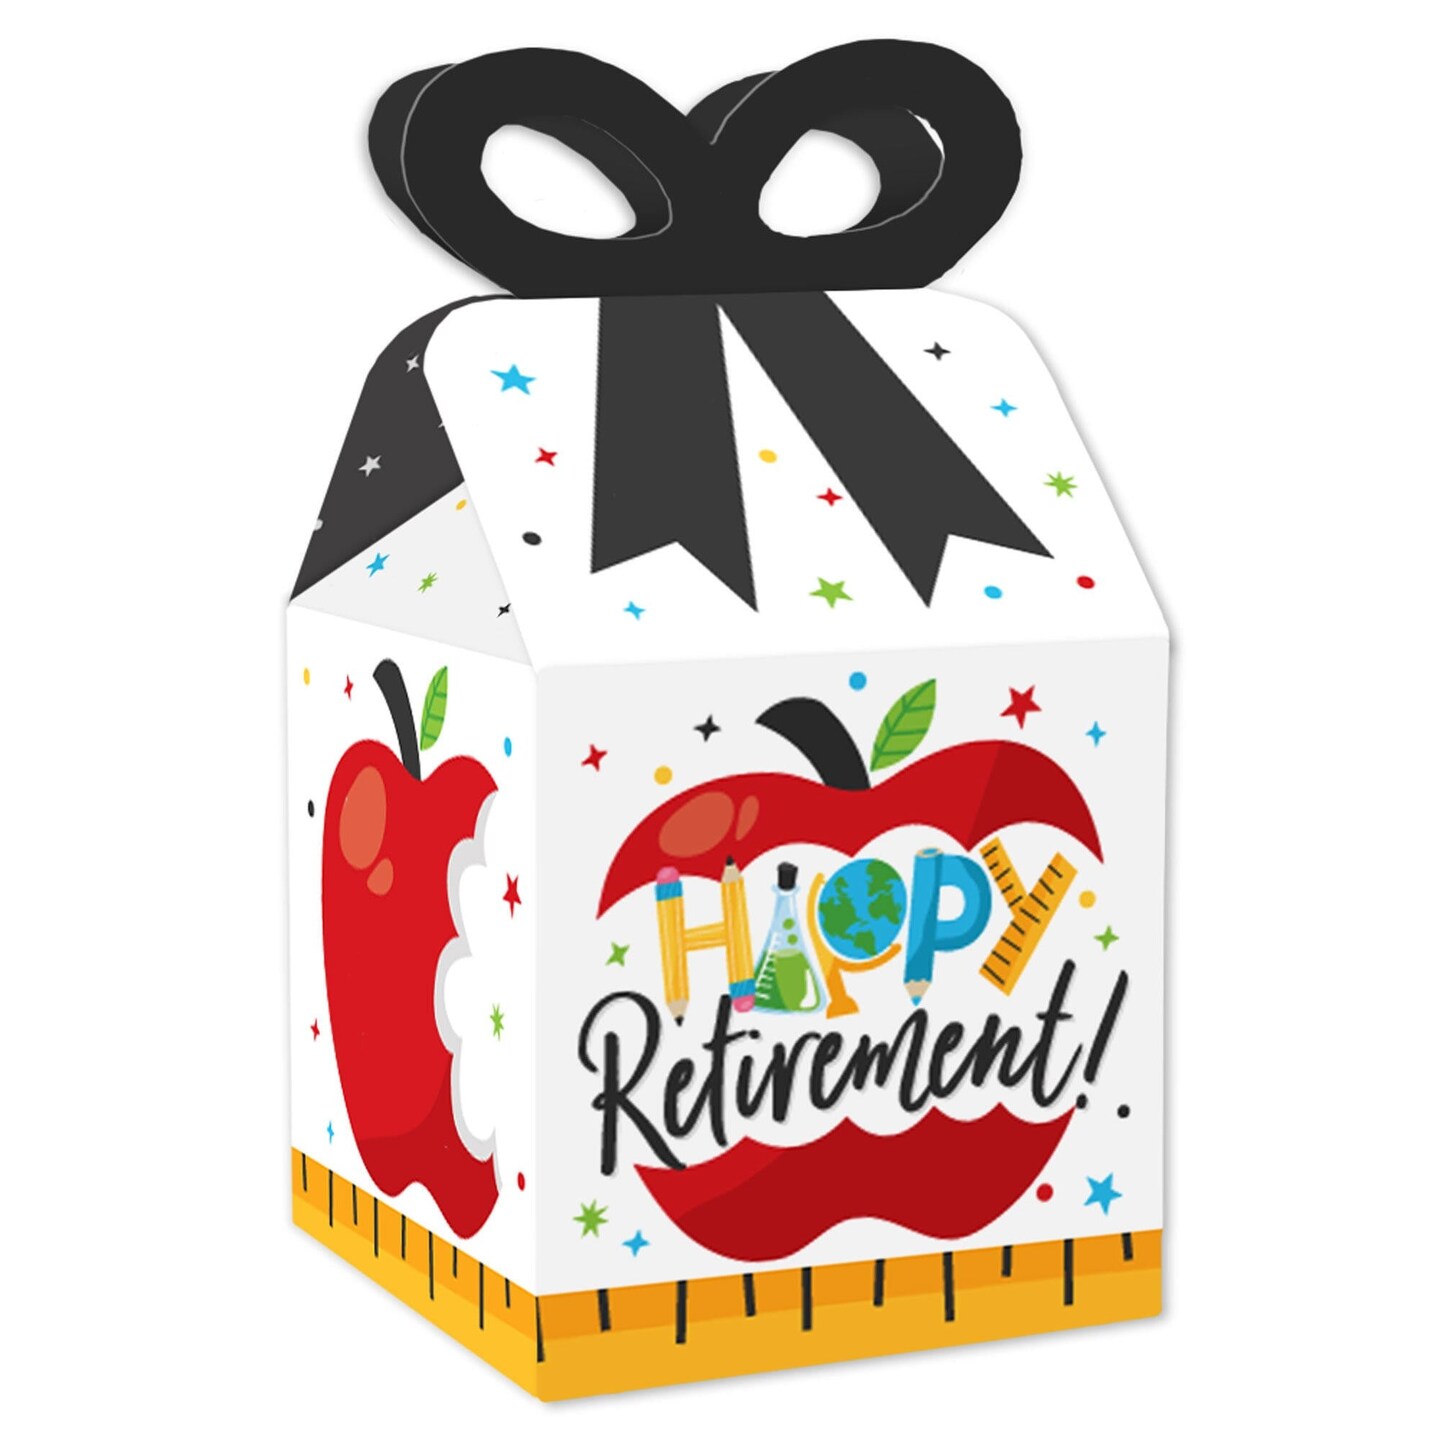 Gift basket | Retirement party gifts, Teacher retirement gifts, Retirement  gifts